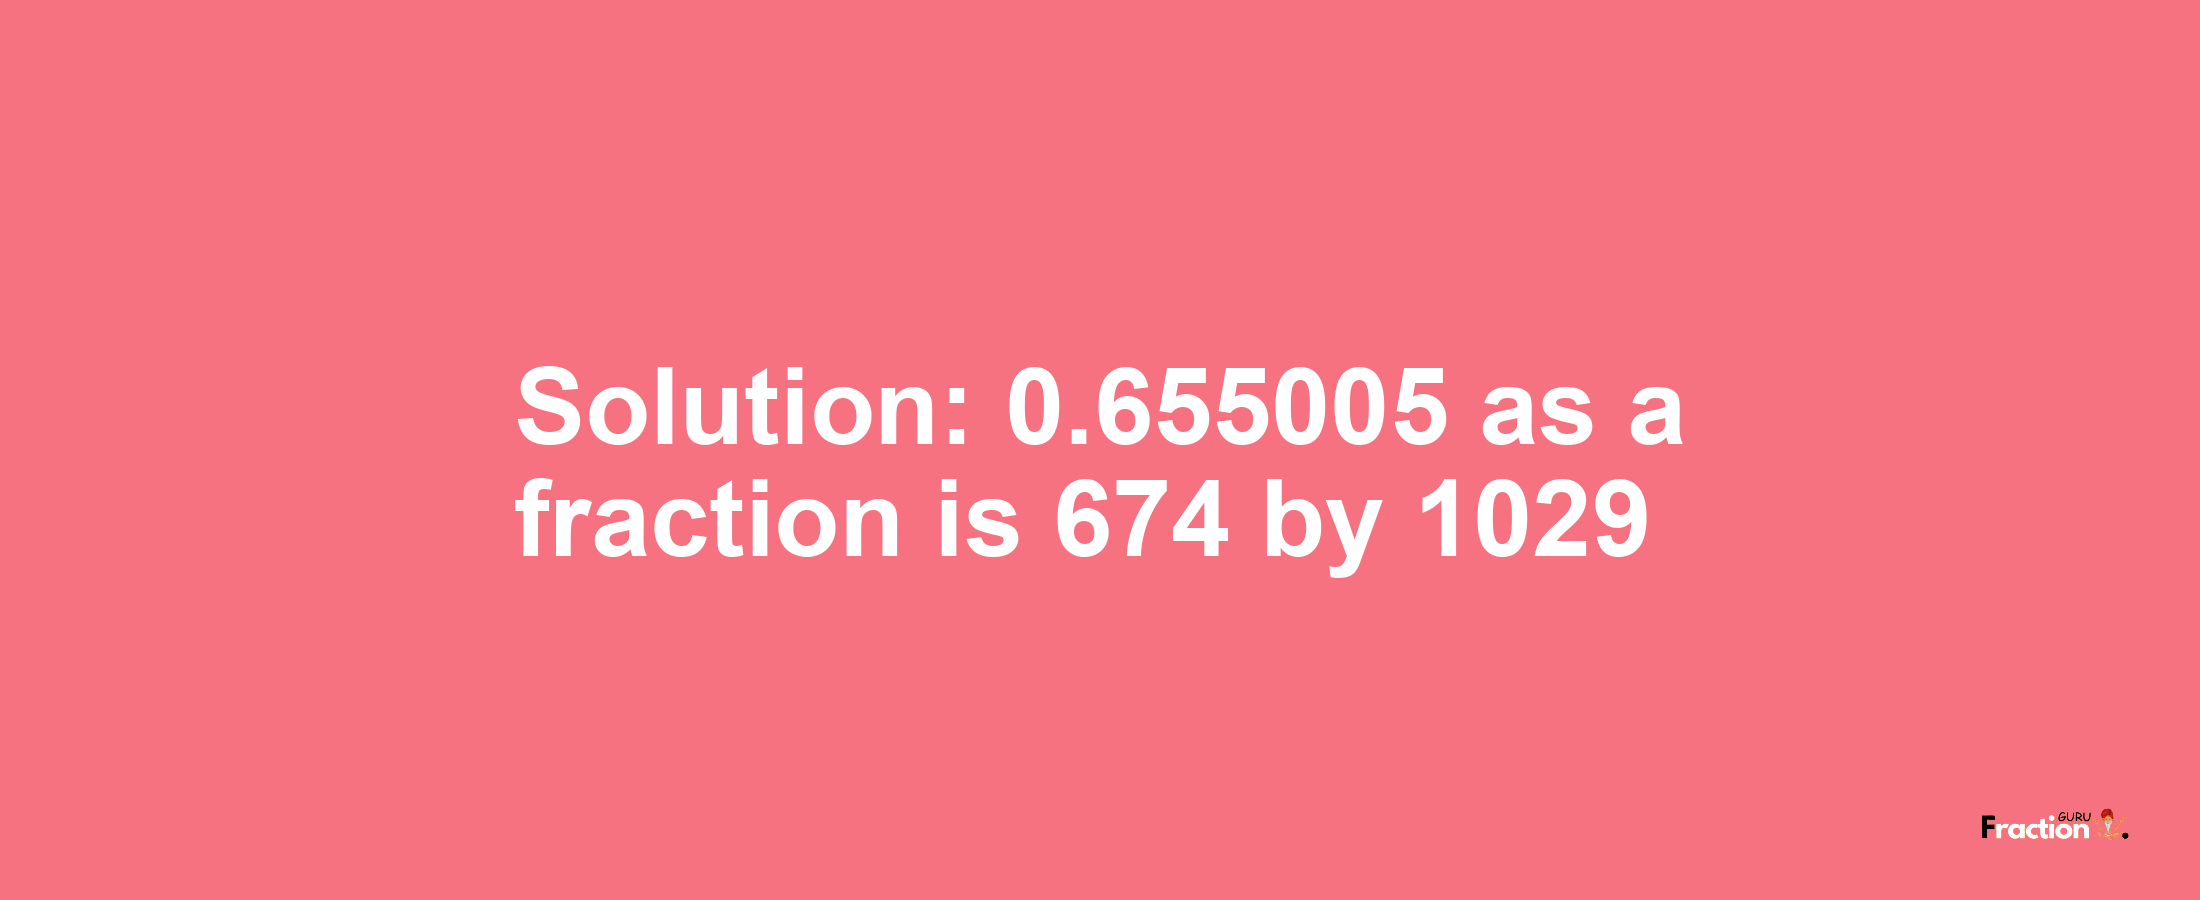 Solution:0.655005 as a fraction is 674/1029